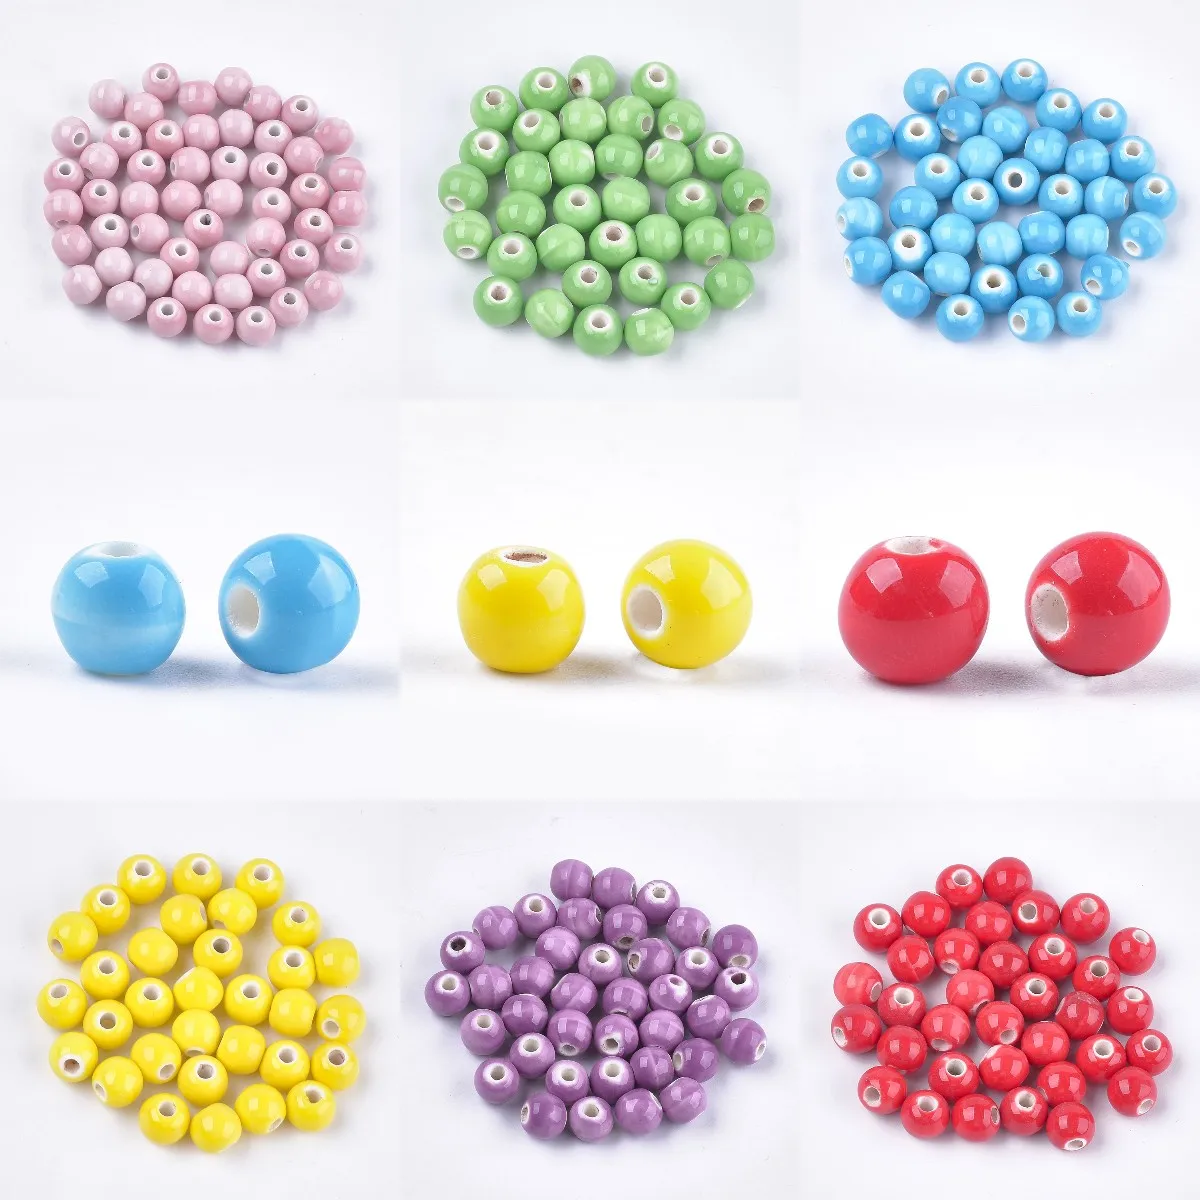 

300Pcs 8mm Bright Glazed Ceramic Beads Round Porcelain Loose Bead Spacer Charm For Bracelet DIY Craft Jewelry Making Accessories